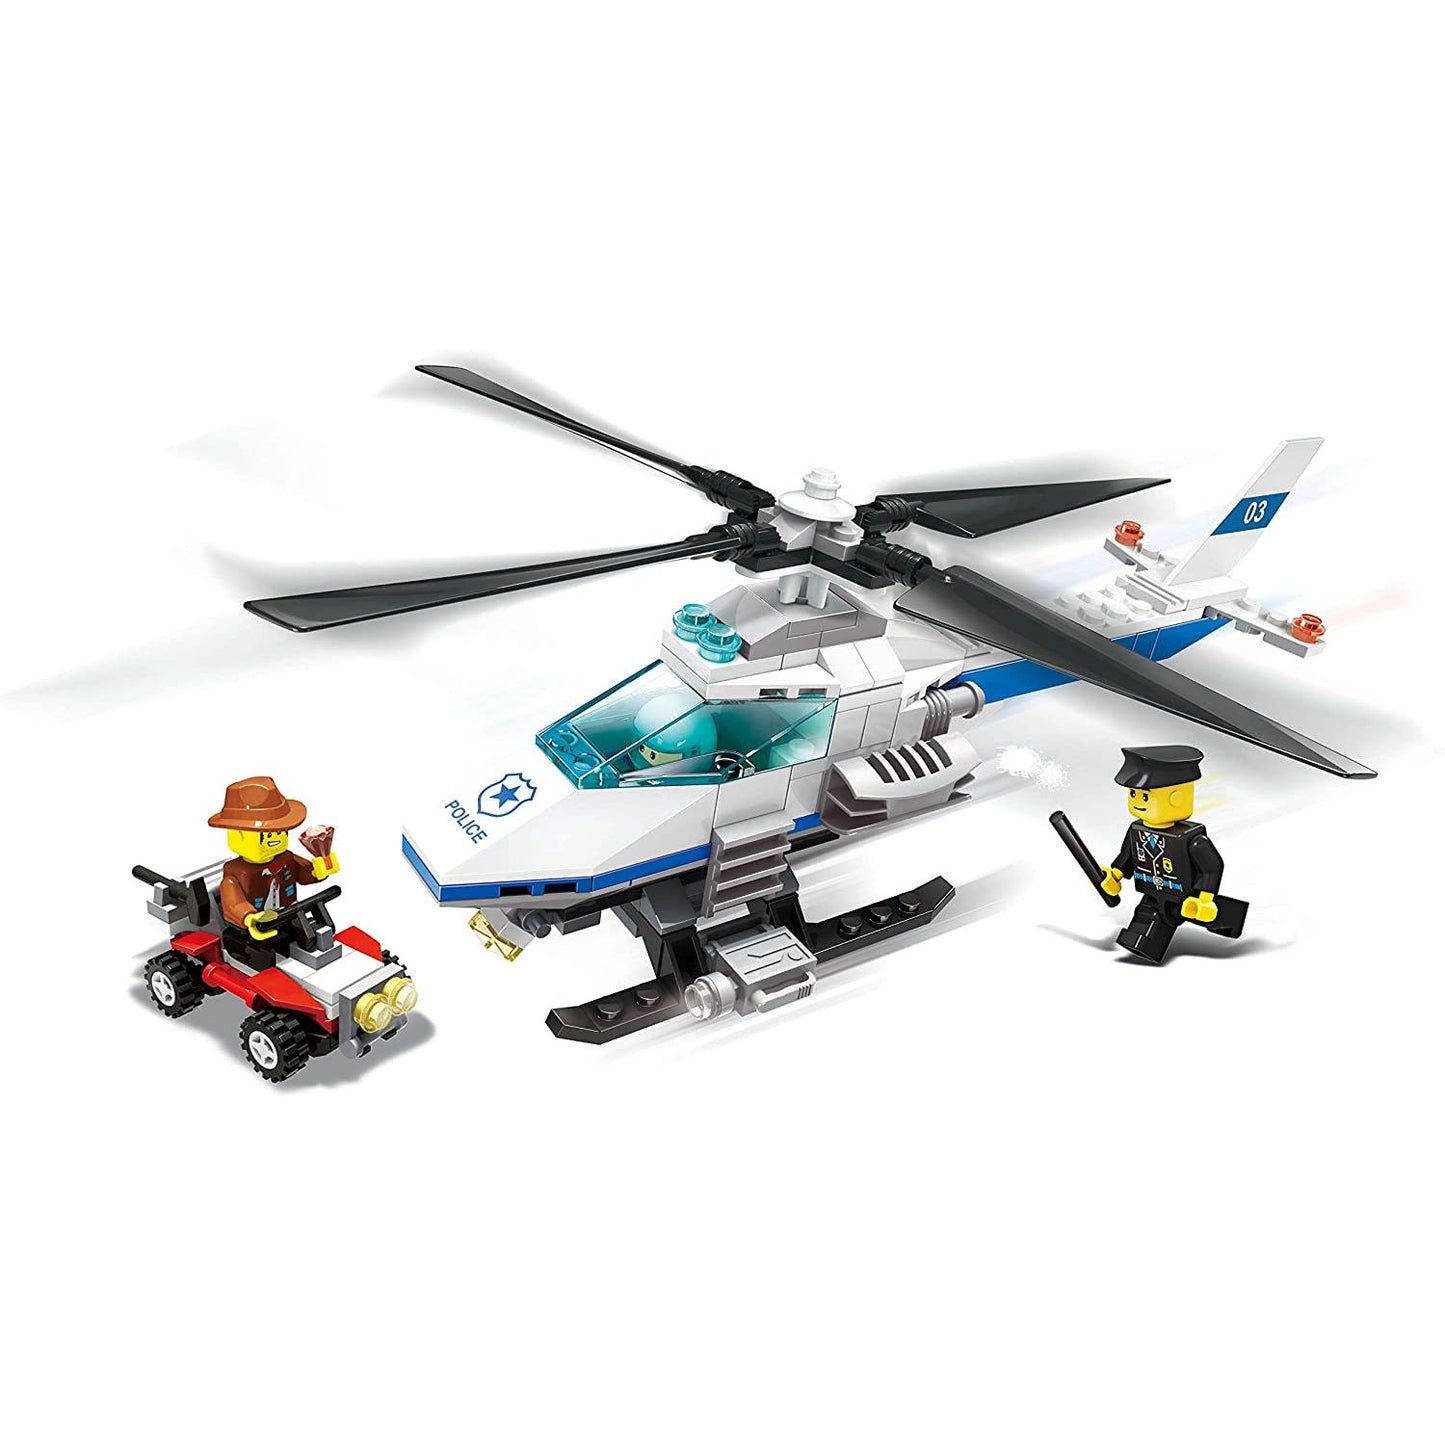 Dragon Blok - Police - Helicopter 3 in 1 Building Set - 206 Pieces